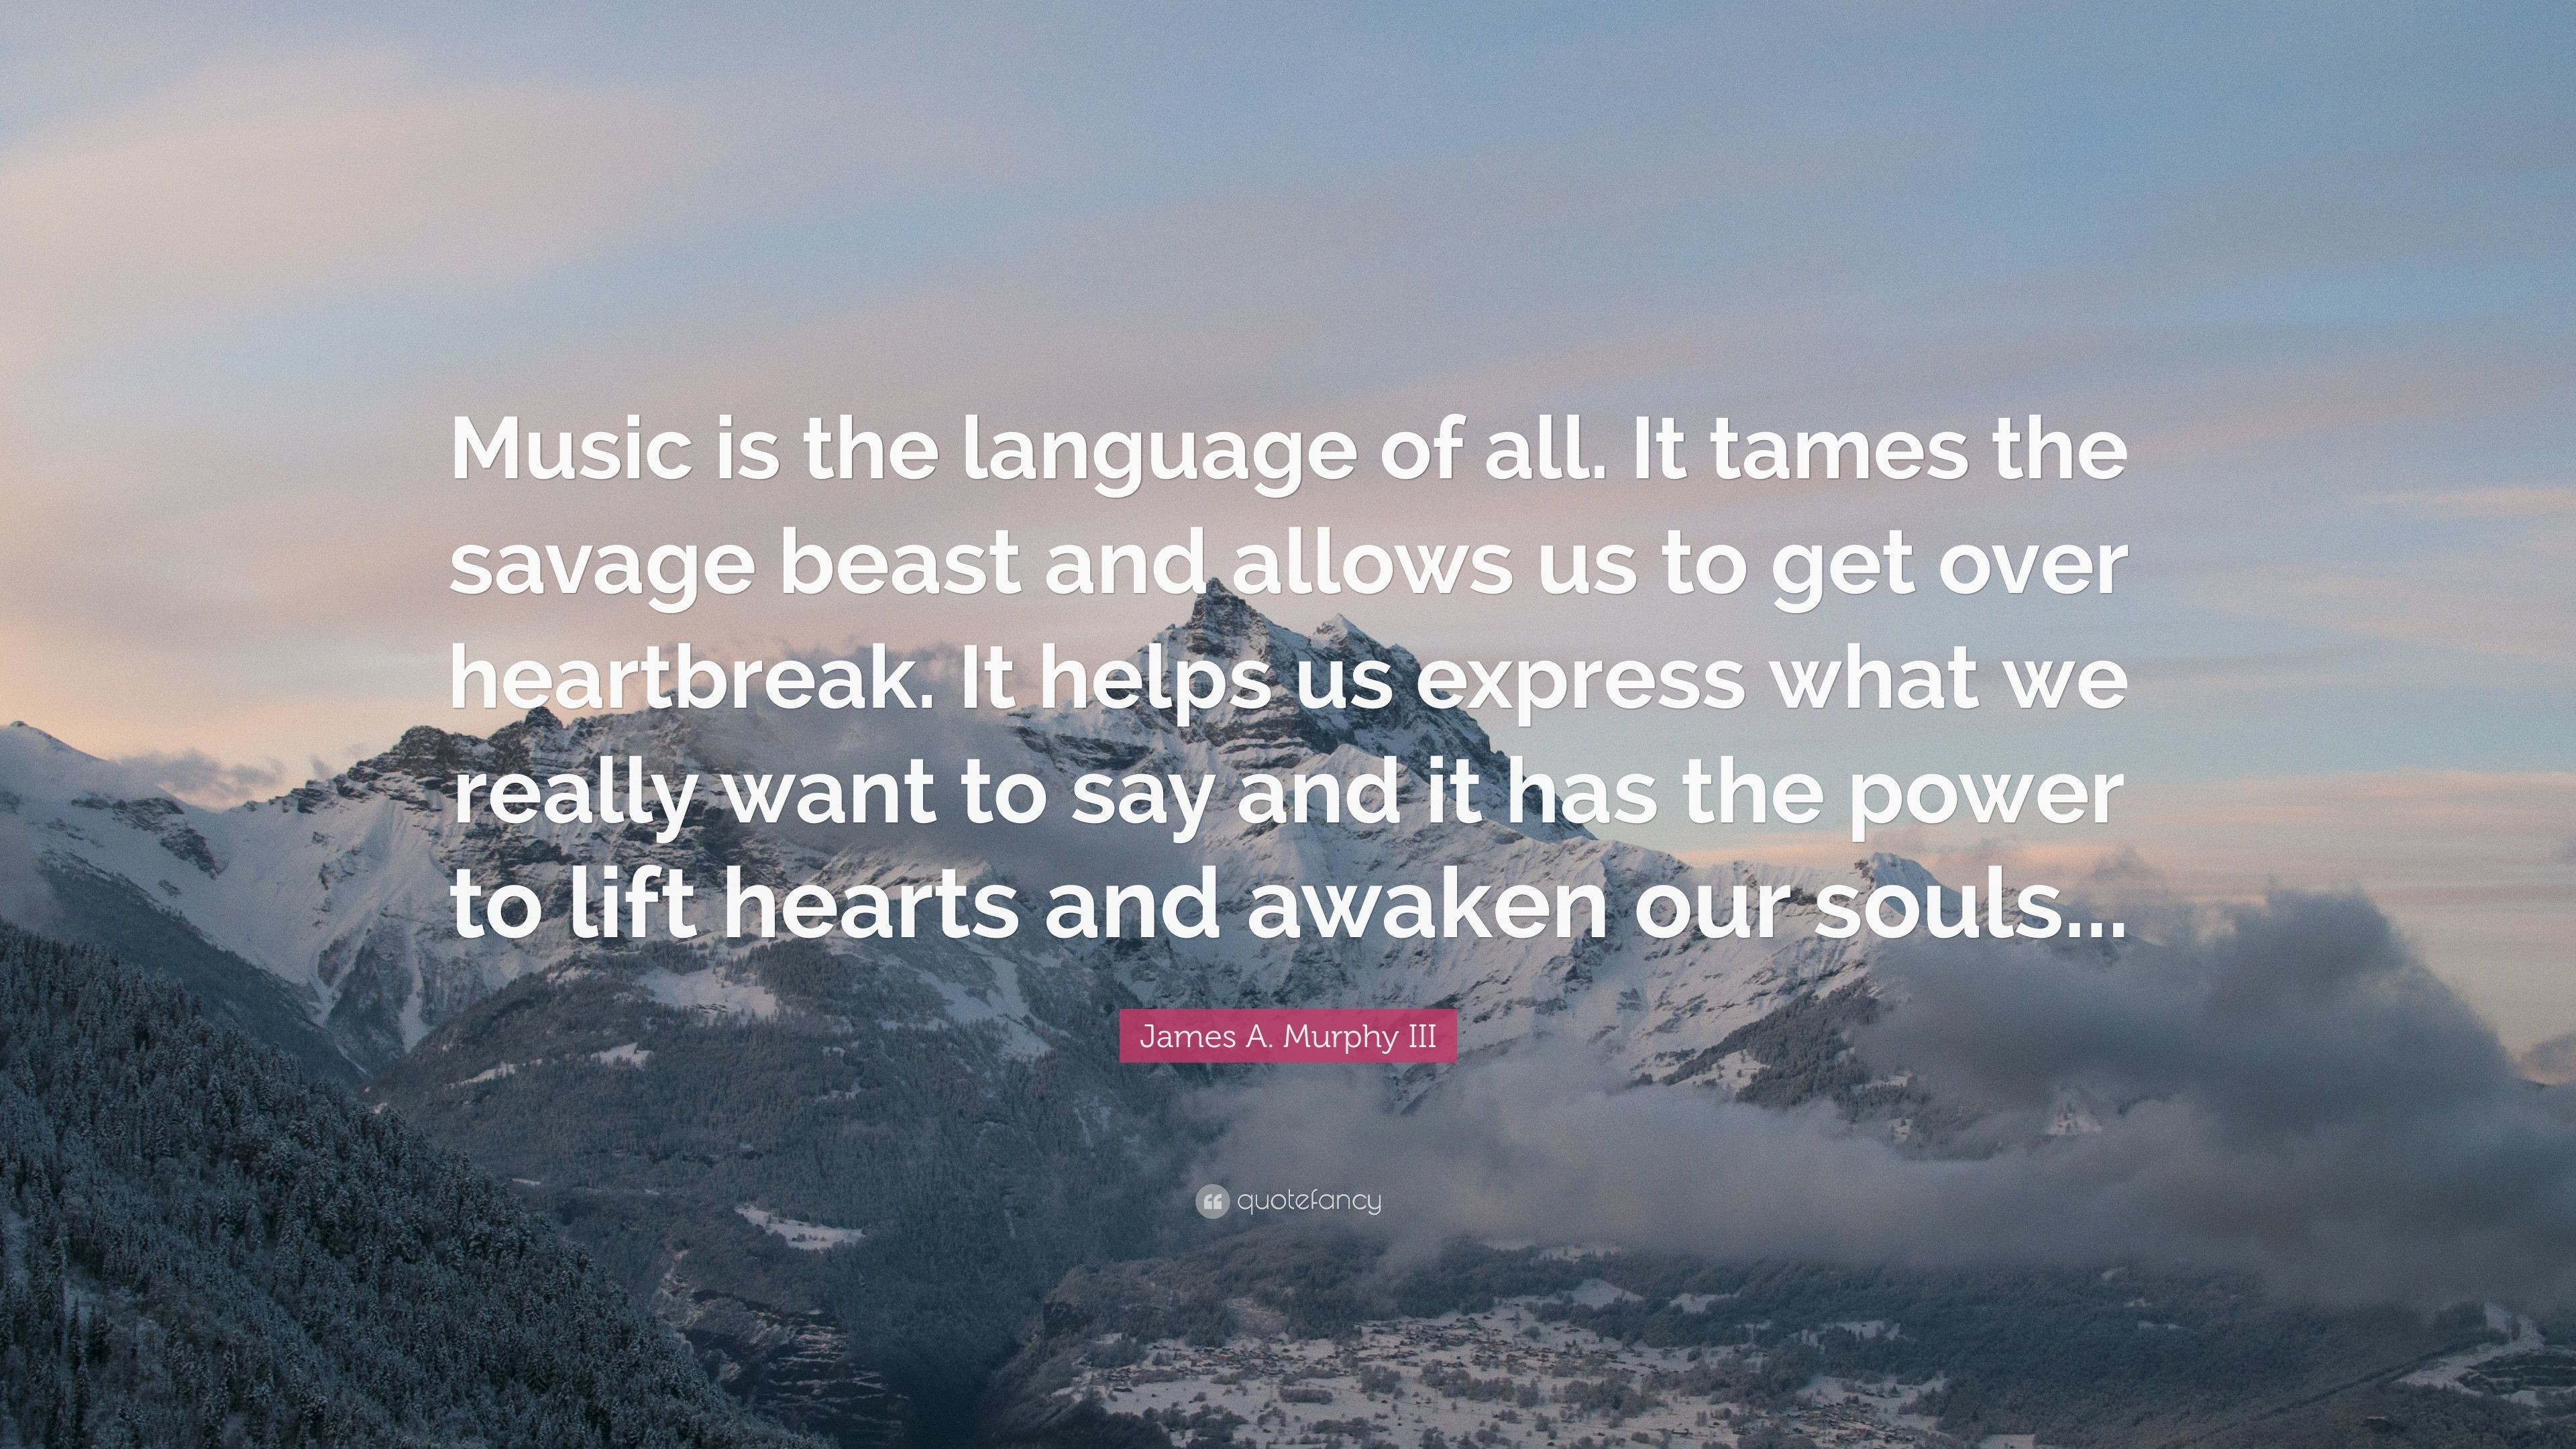 3840x2160 James A. Murphy III Quote: “Music is the language of all. It